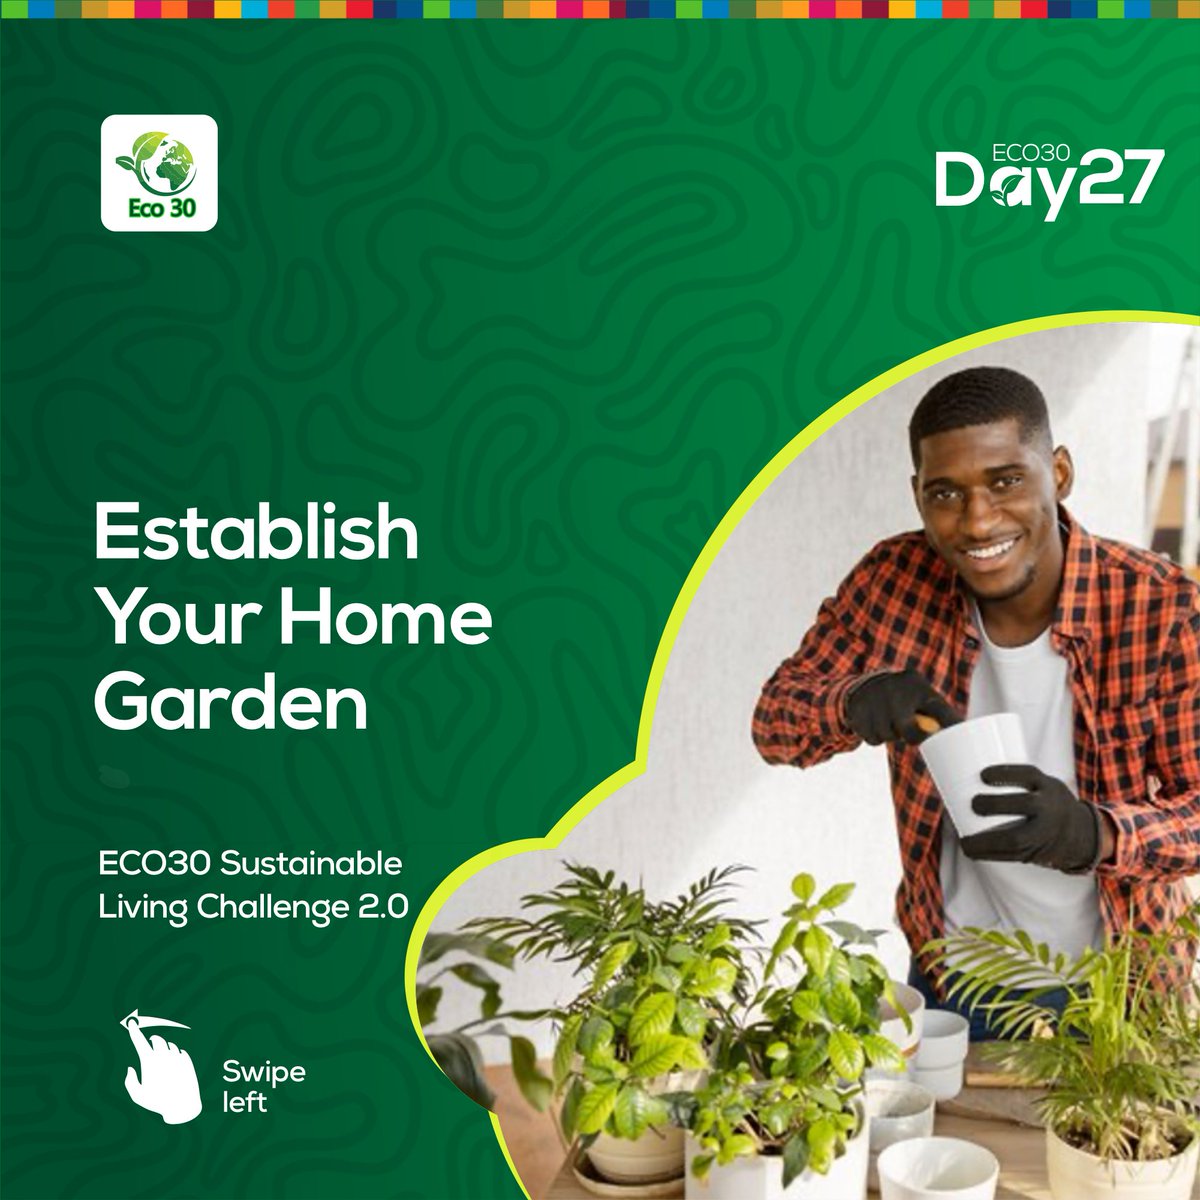 house. In the meantime, I plan to encourage family and friends to embark on their own home gardening journeys, recognizing the positive impact it can have on both individuals and the planet.#eco30Champions #eco30Impact